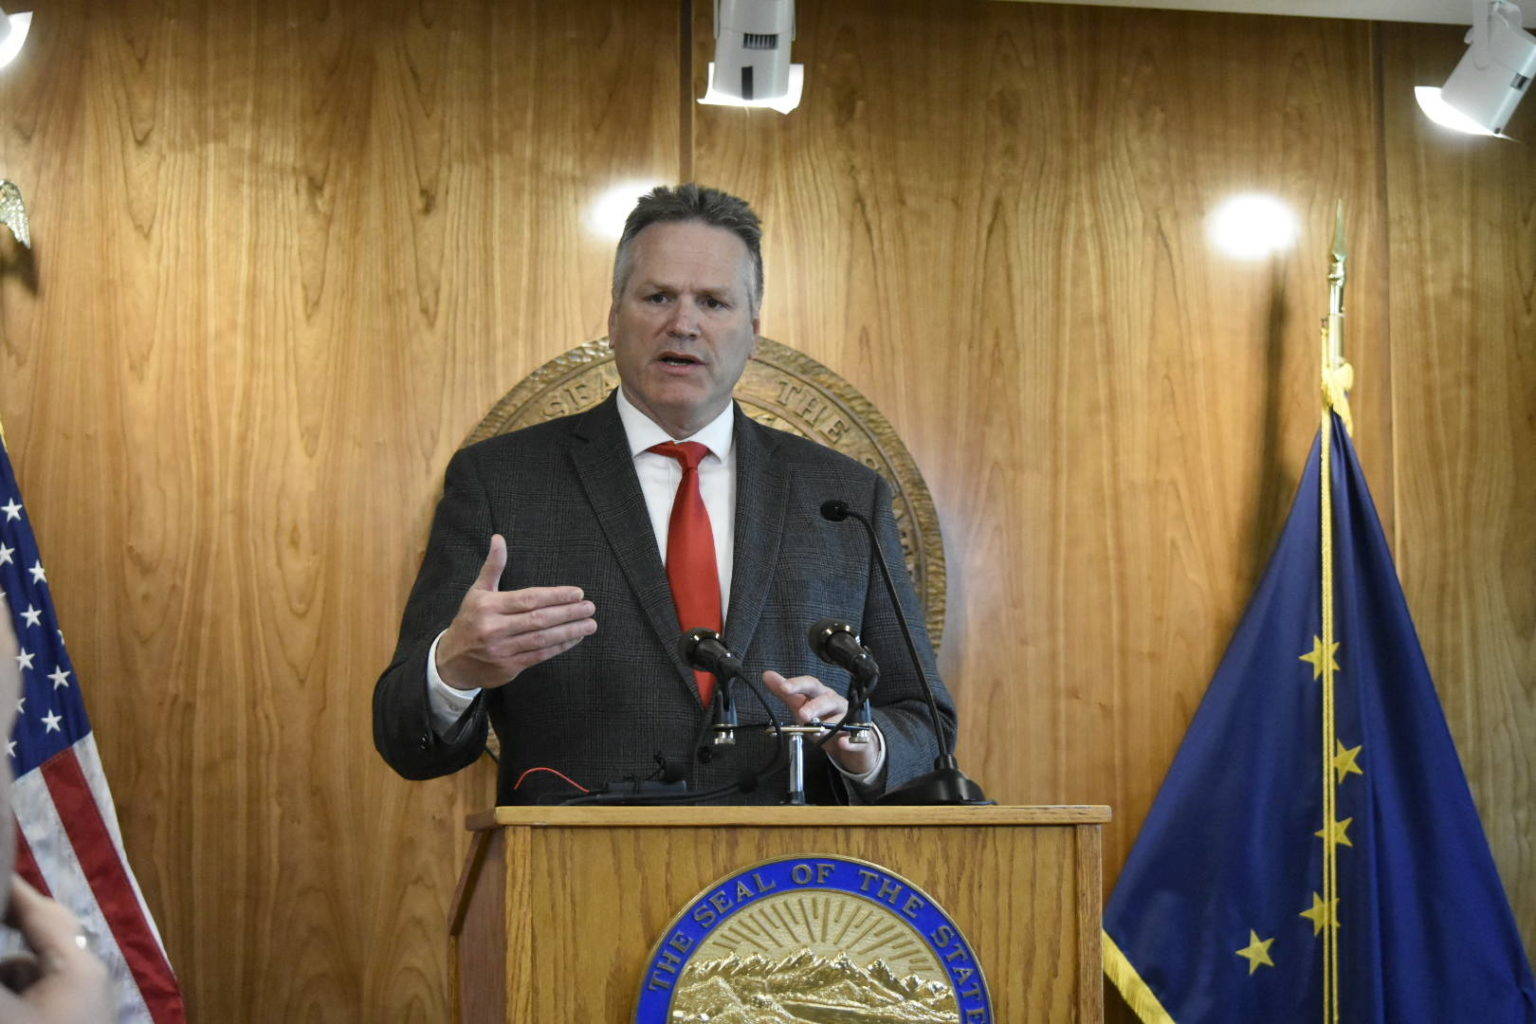 Peter Segall / Juneau Empire File
Gov. Mike Dunleavy, seen here speaking at a June 17, 2021 news conference at the Alaska State Capitol, announced $215 million in vetoes to the state budget Thursday, and called on lawmakers to come together to solve the state’s fiscal issues.